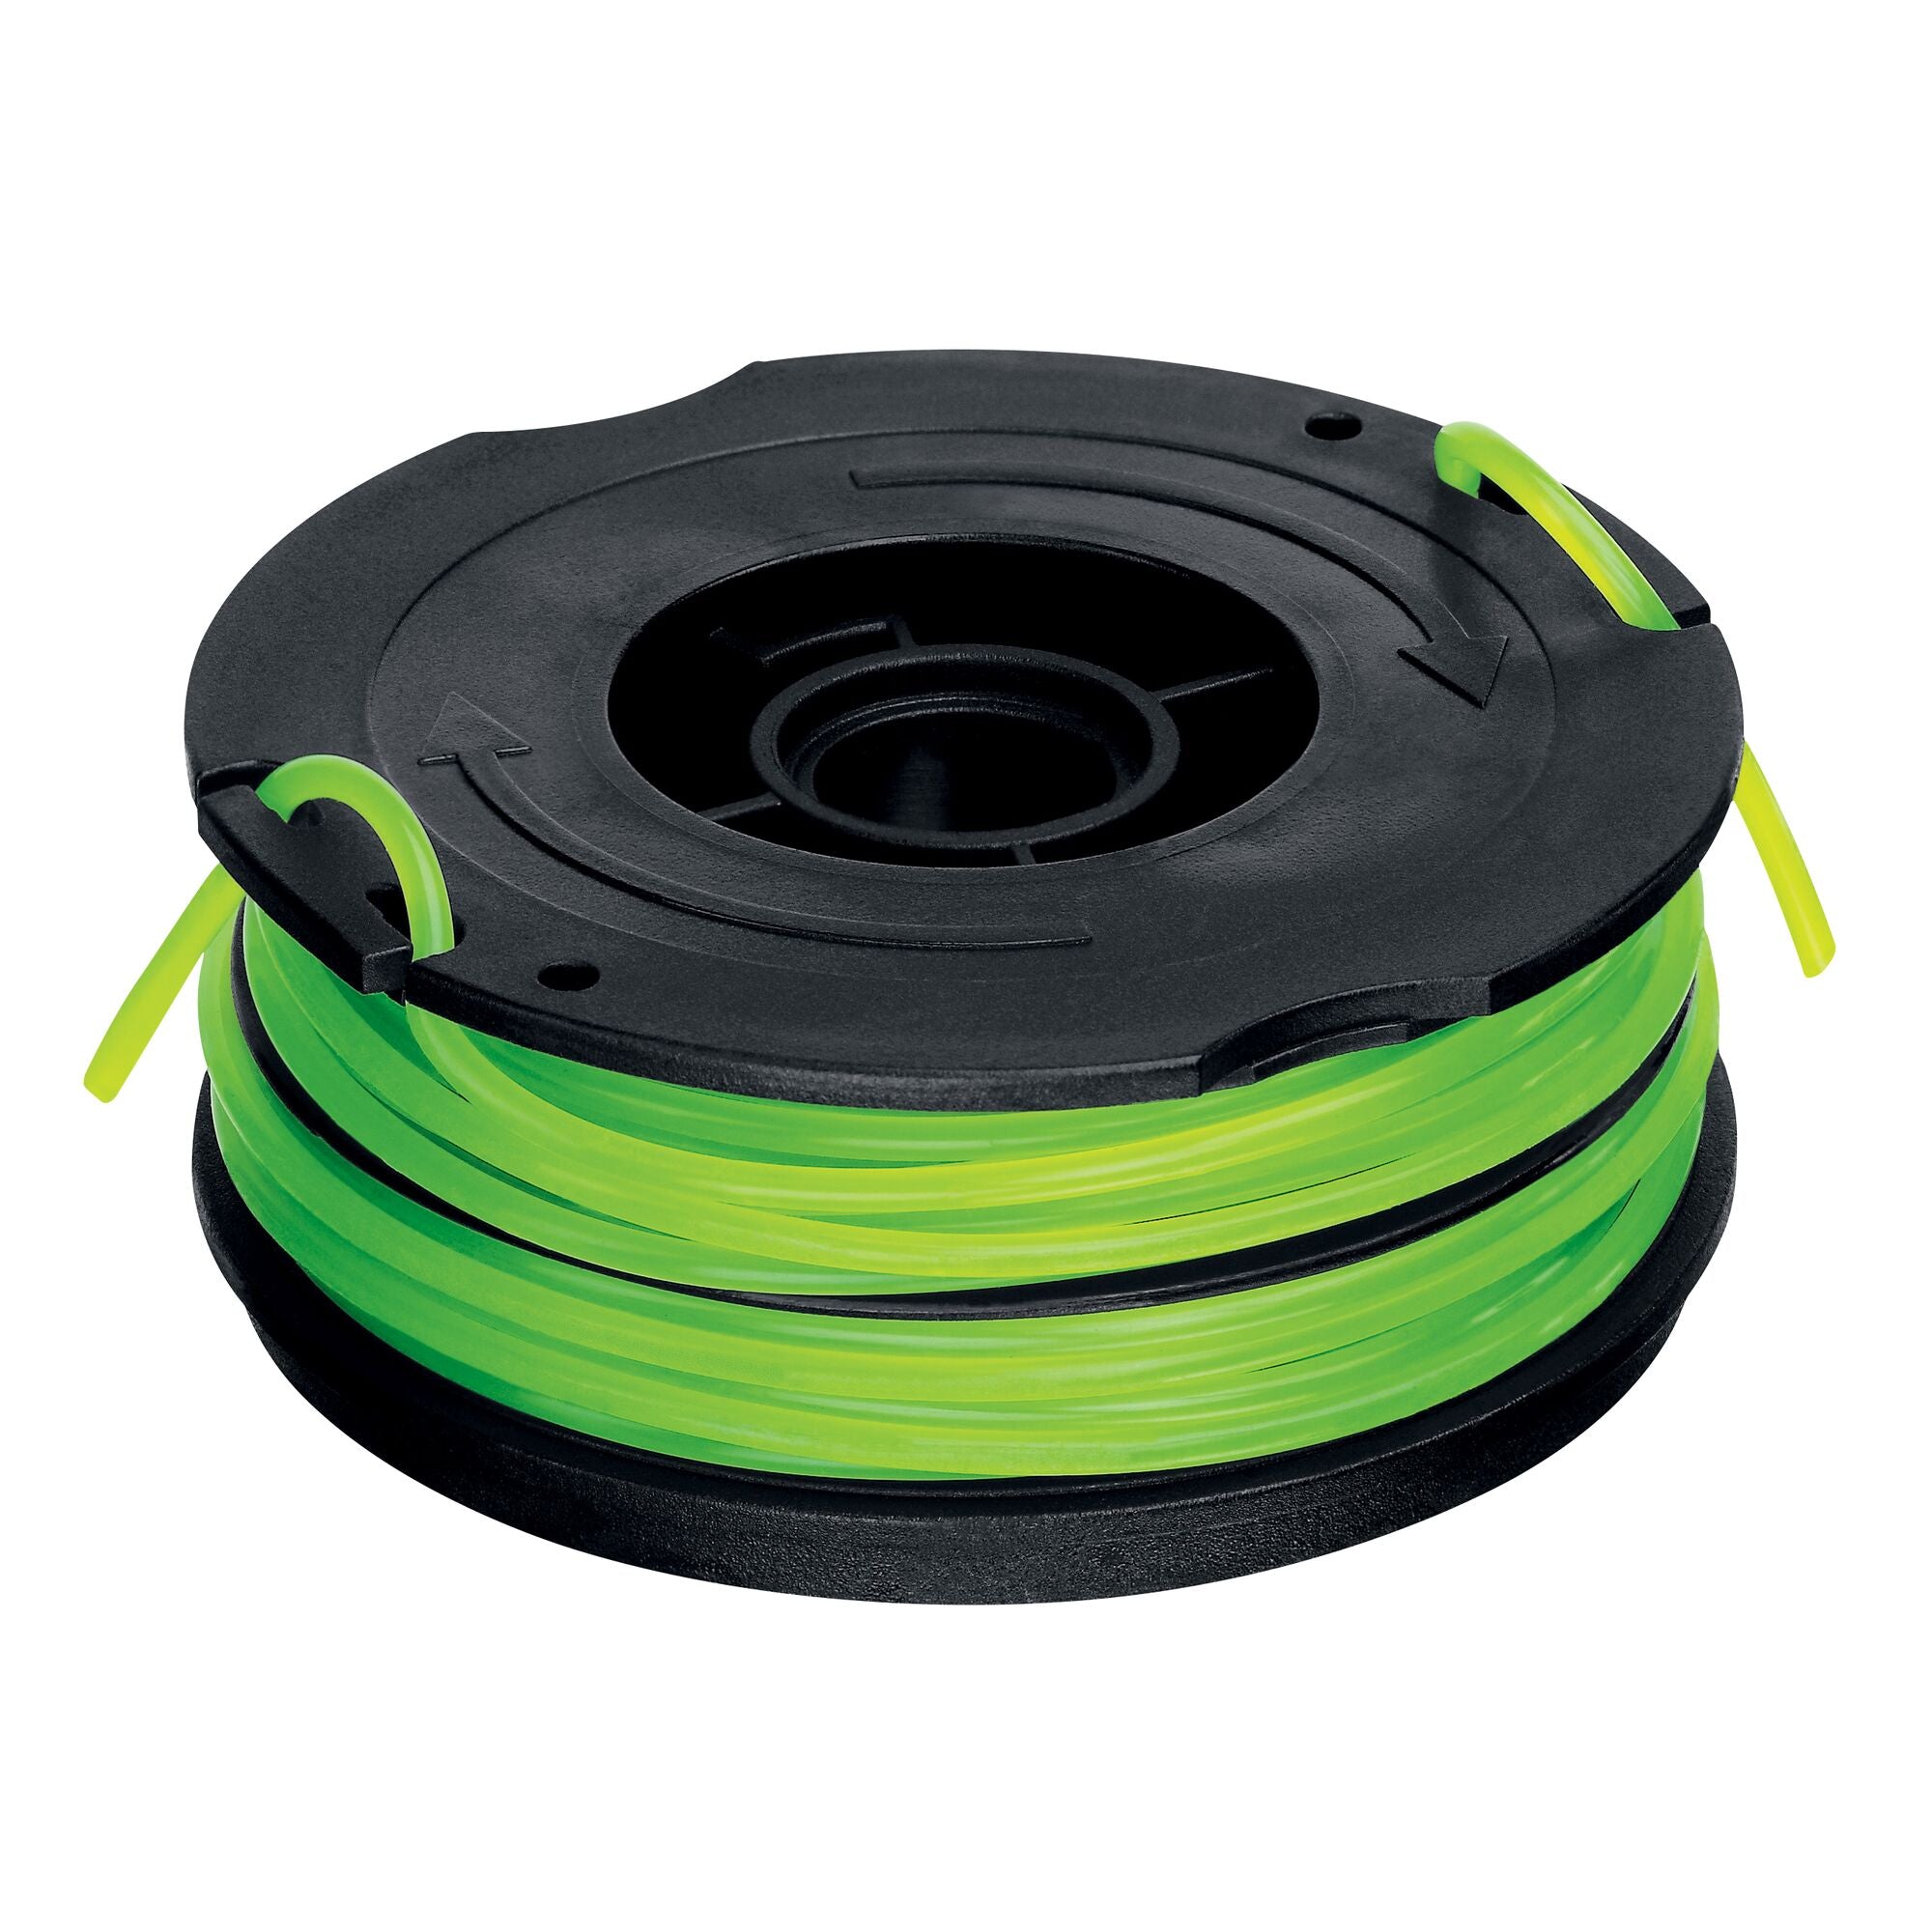 String Trimmer Replacement Spool Compatible With Black+decker